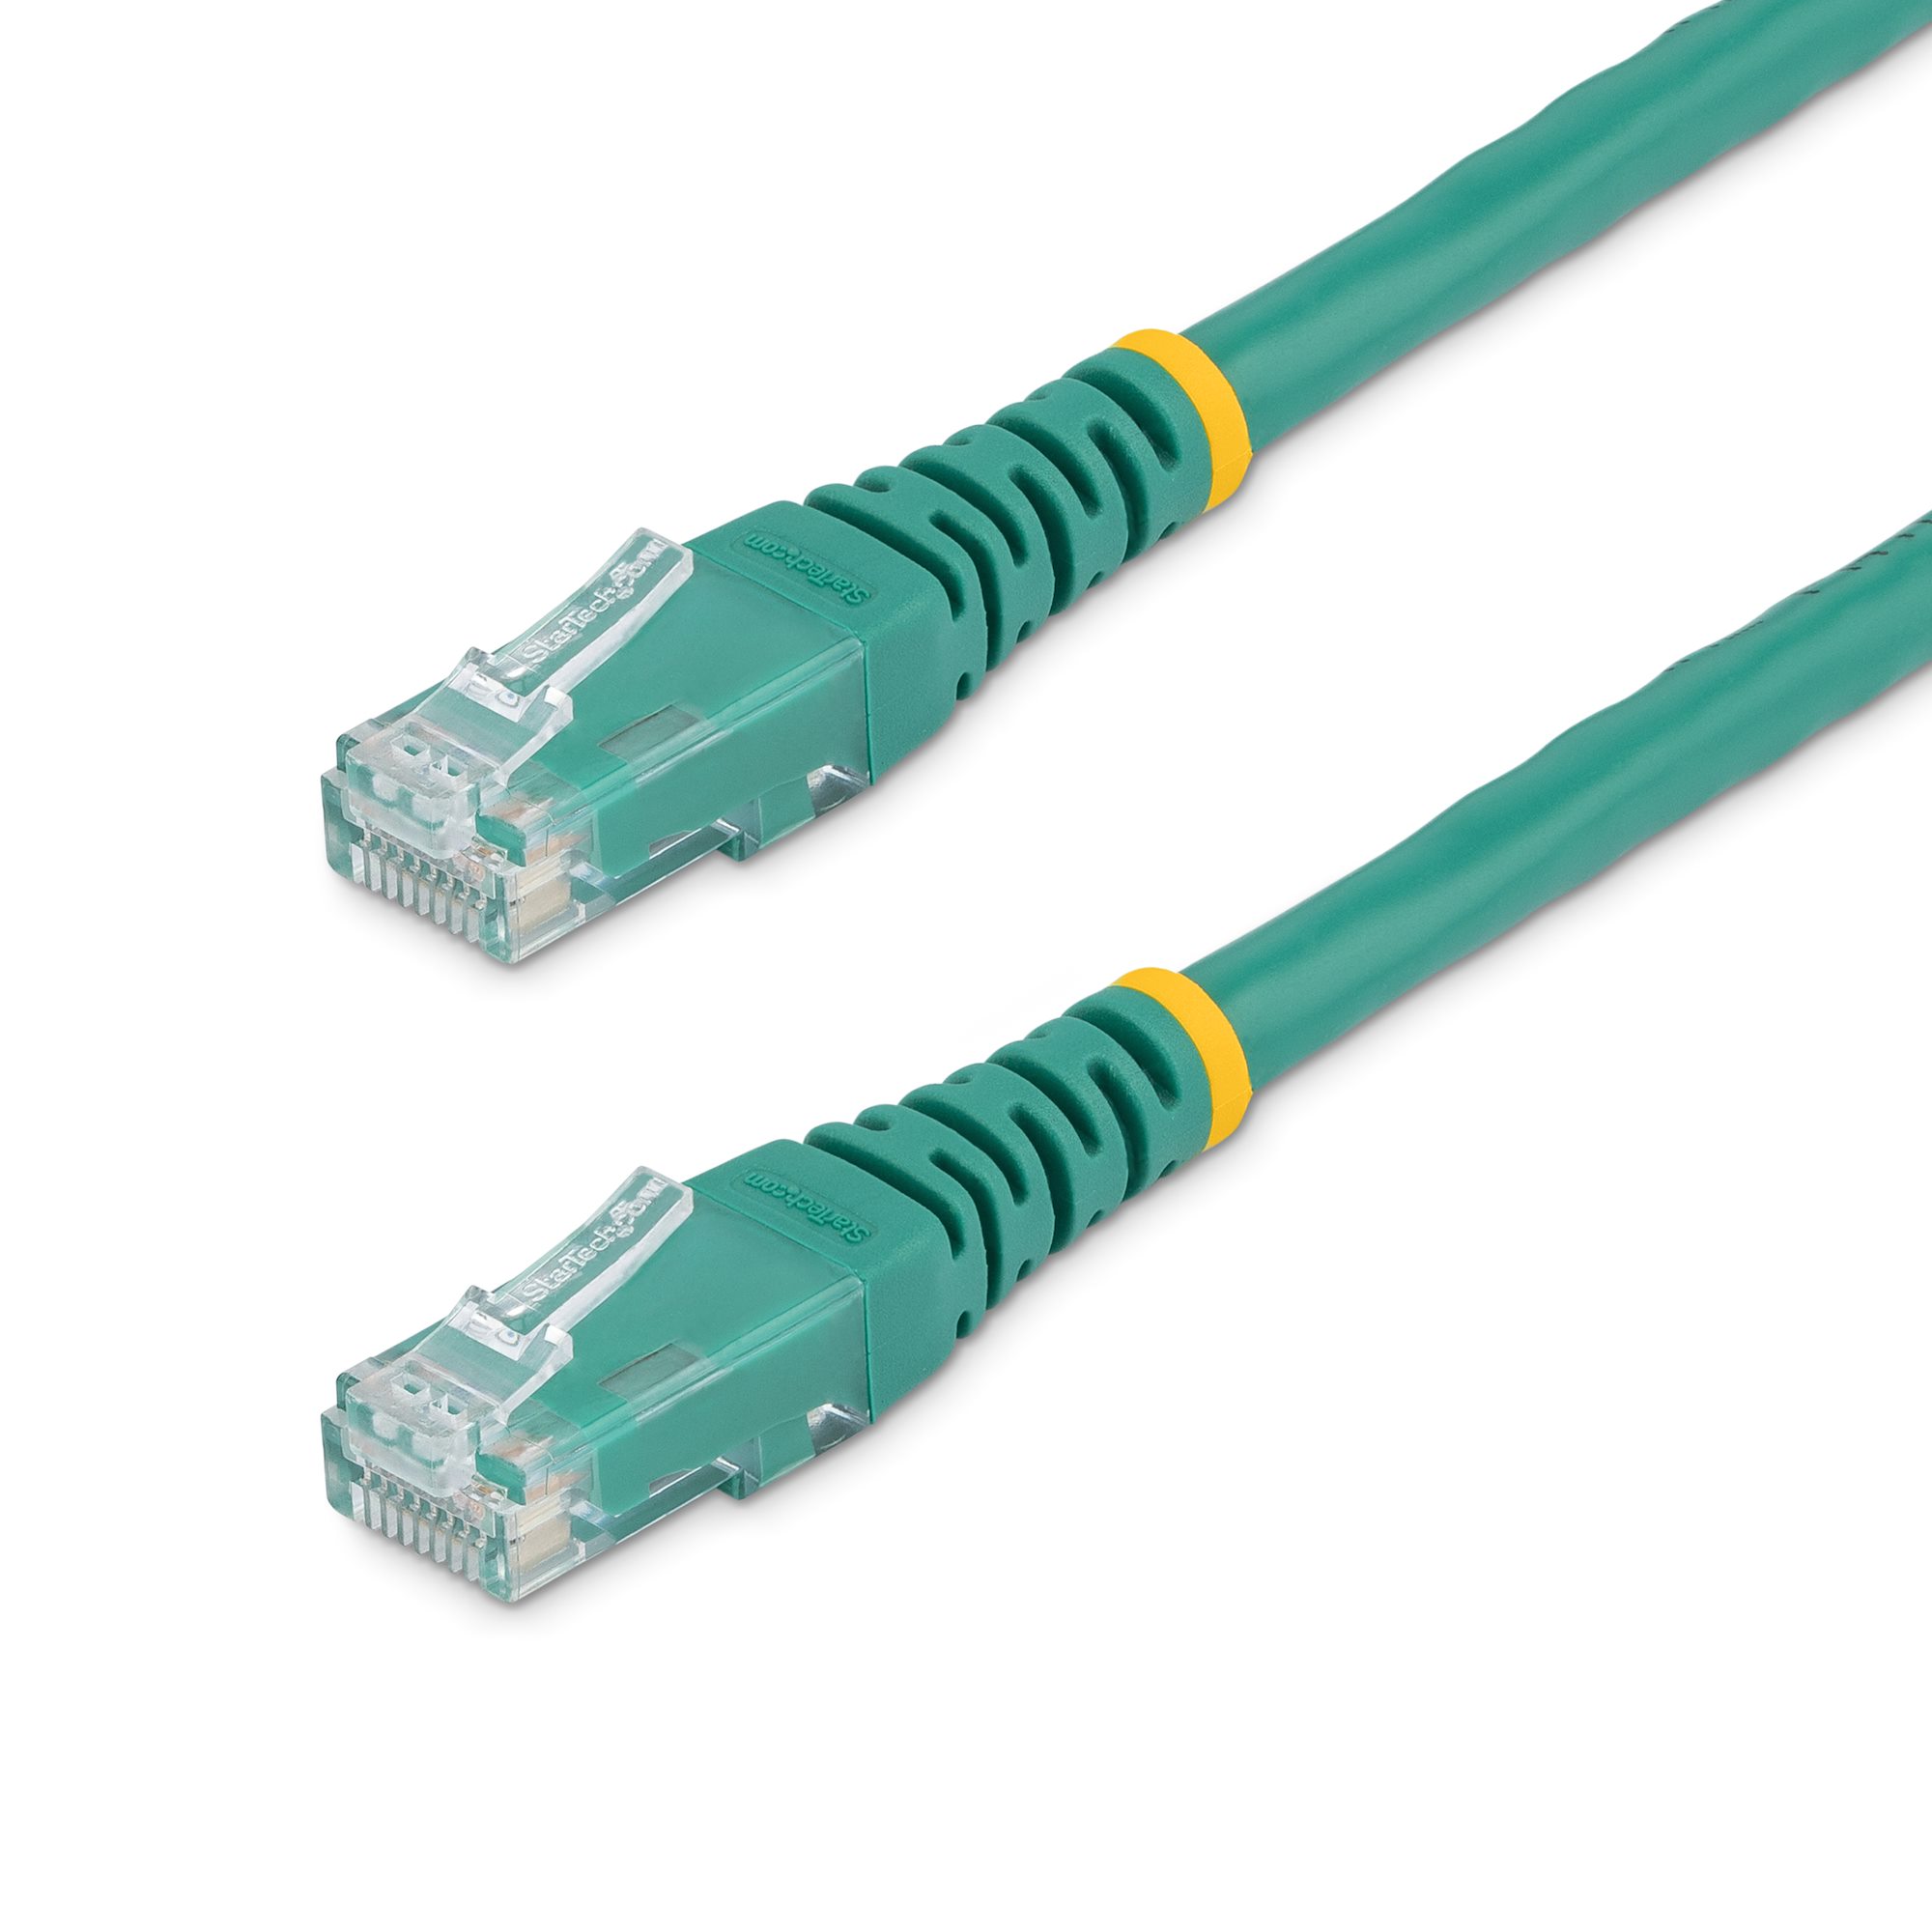 UGREEN Cat 6 Ethernet Patch Cable Gigabit RJ45 Network Wire Lan